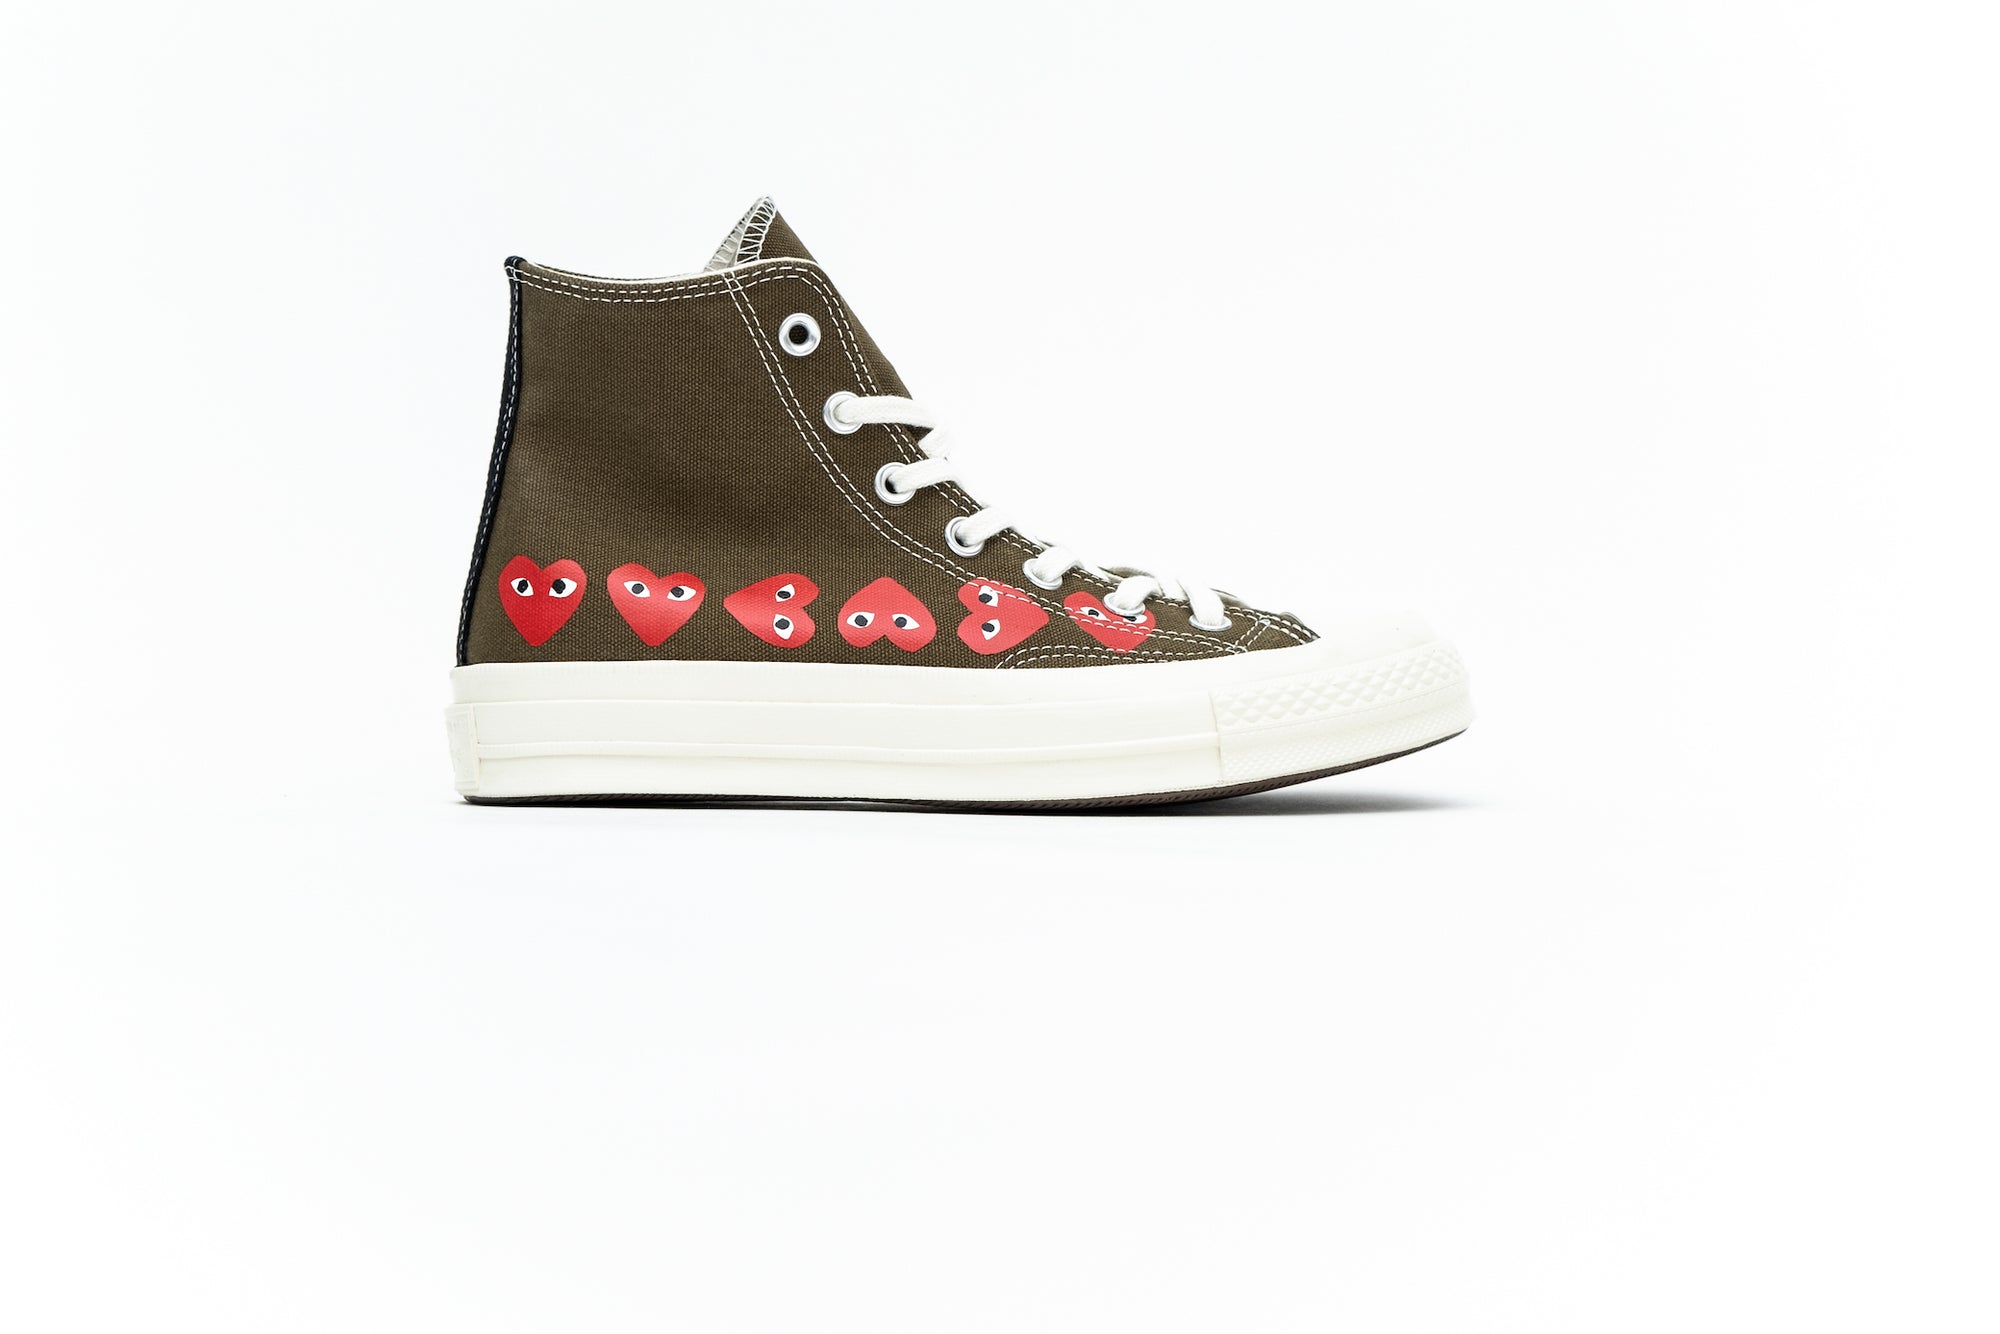 Converse 70 Play CDG Hi - SoleFly